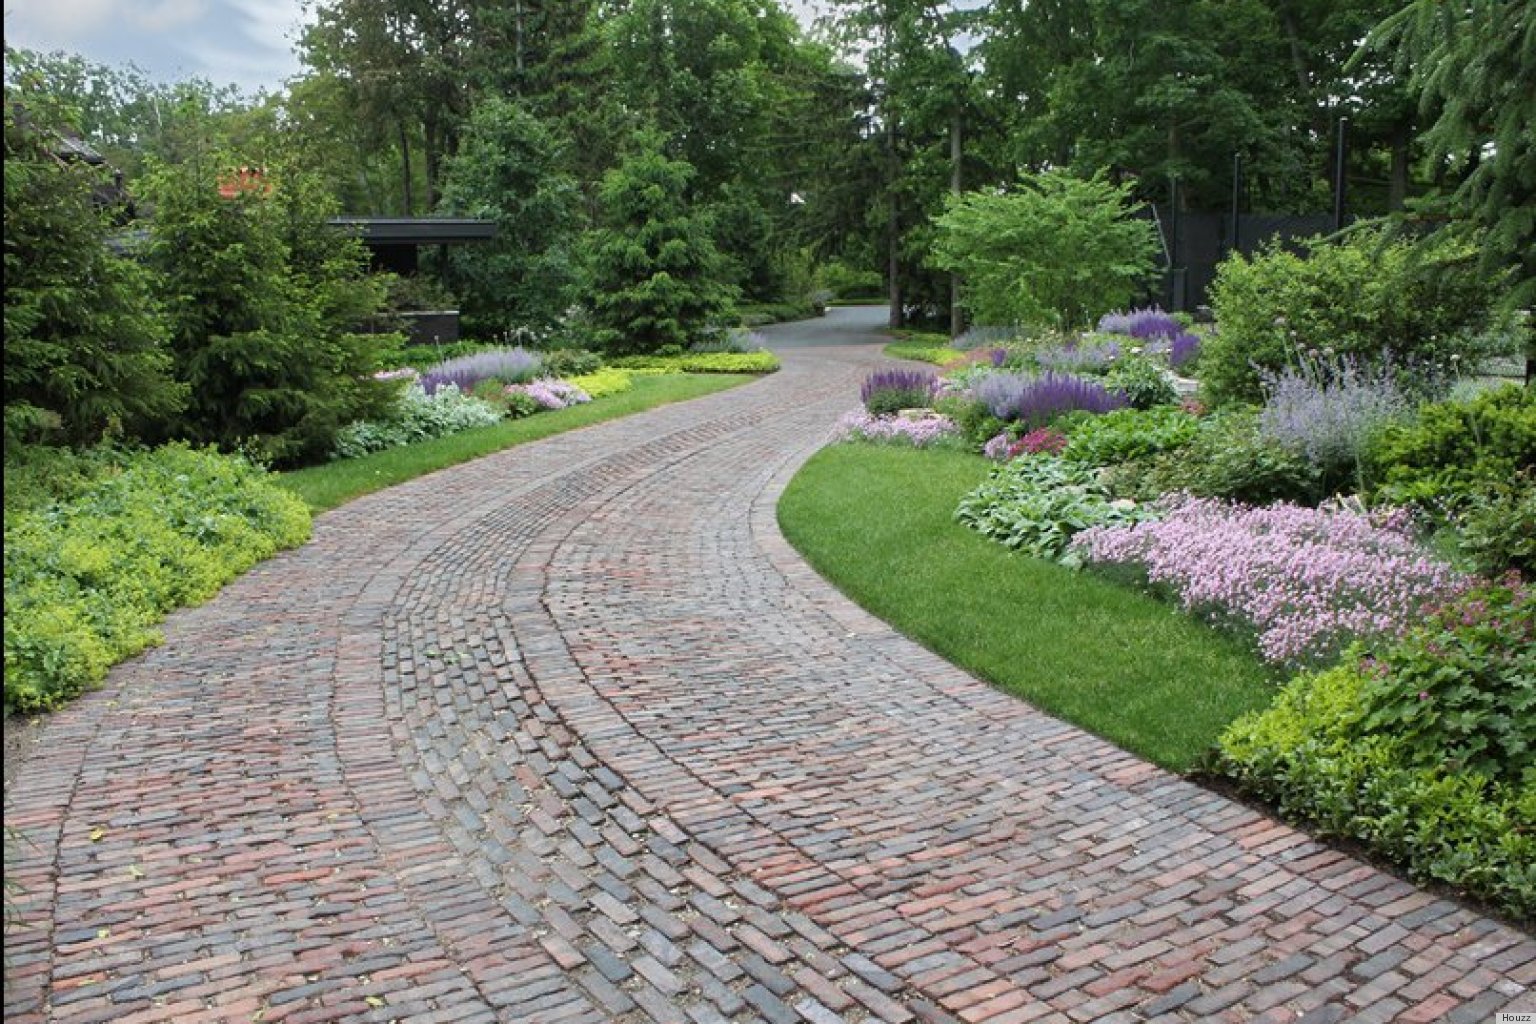 My LandScaping Collection: Landscaping ideas for narrow ...